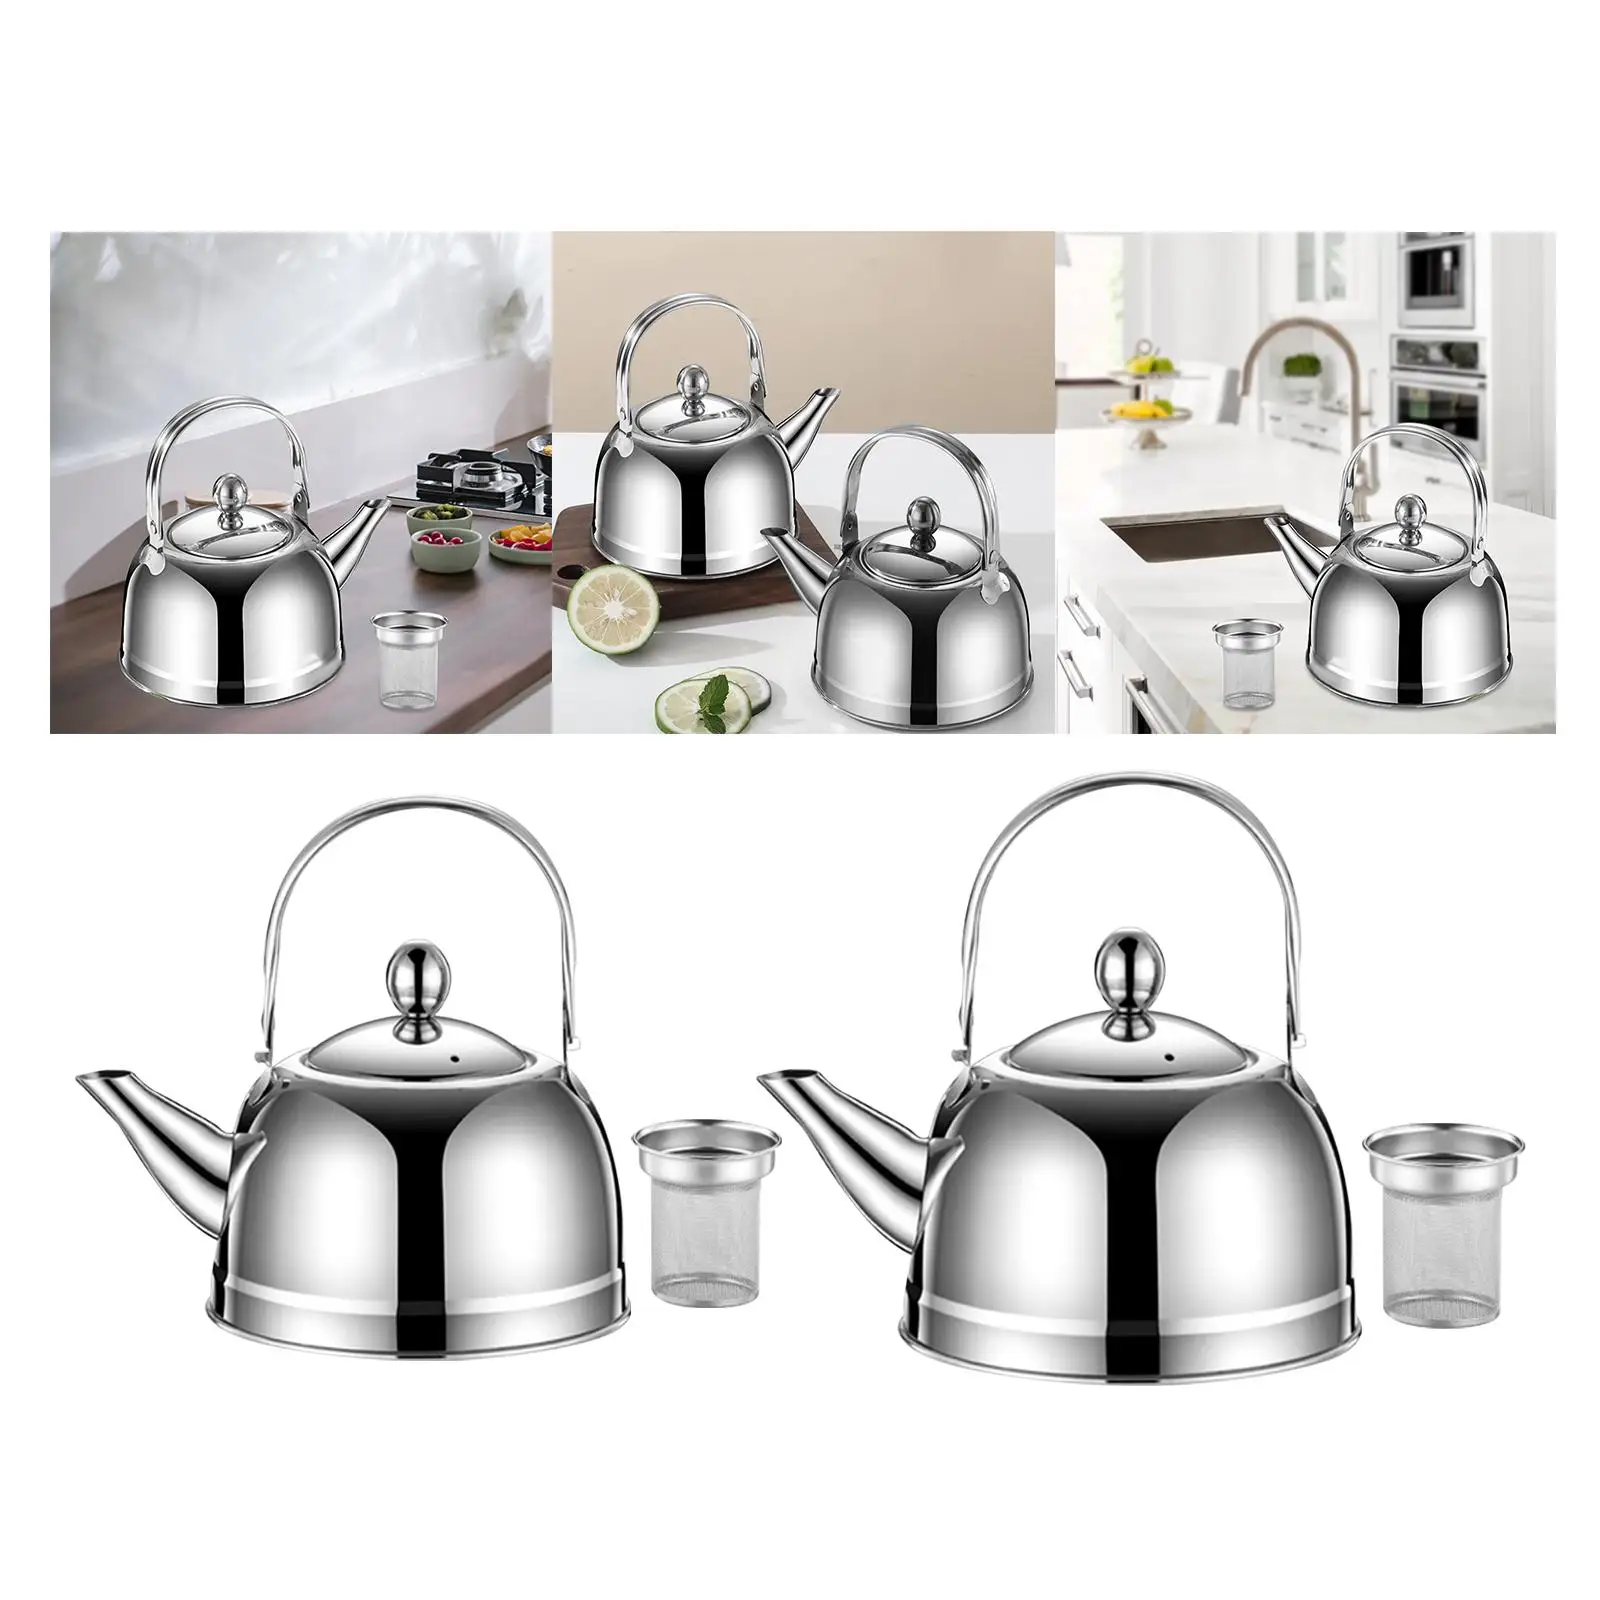 Portable Tea Kettle with Infuser Tea Pot Large Capacity for Picnic Hiking Kitchen Restaurant